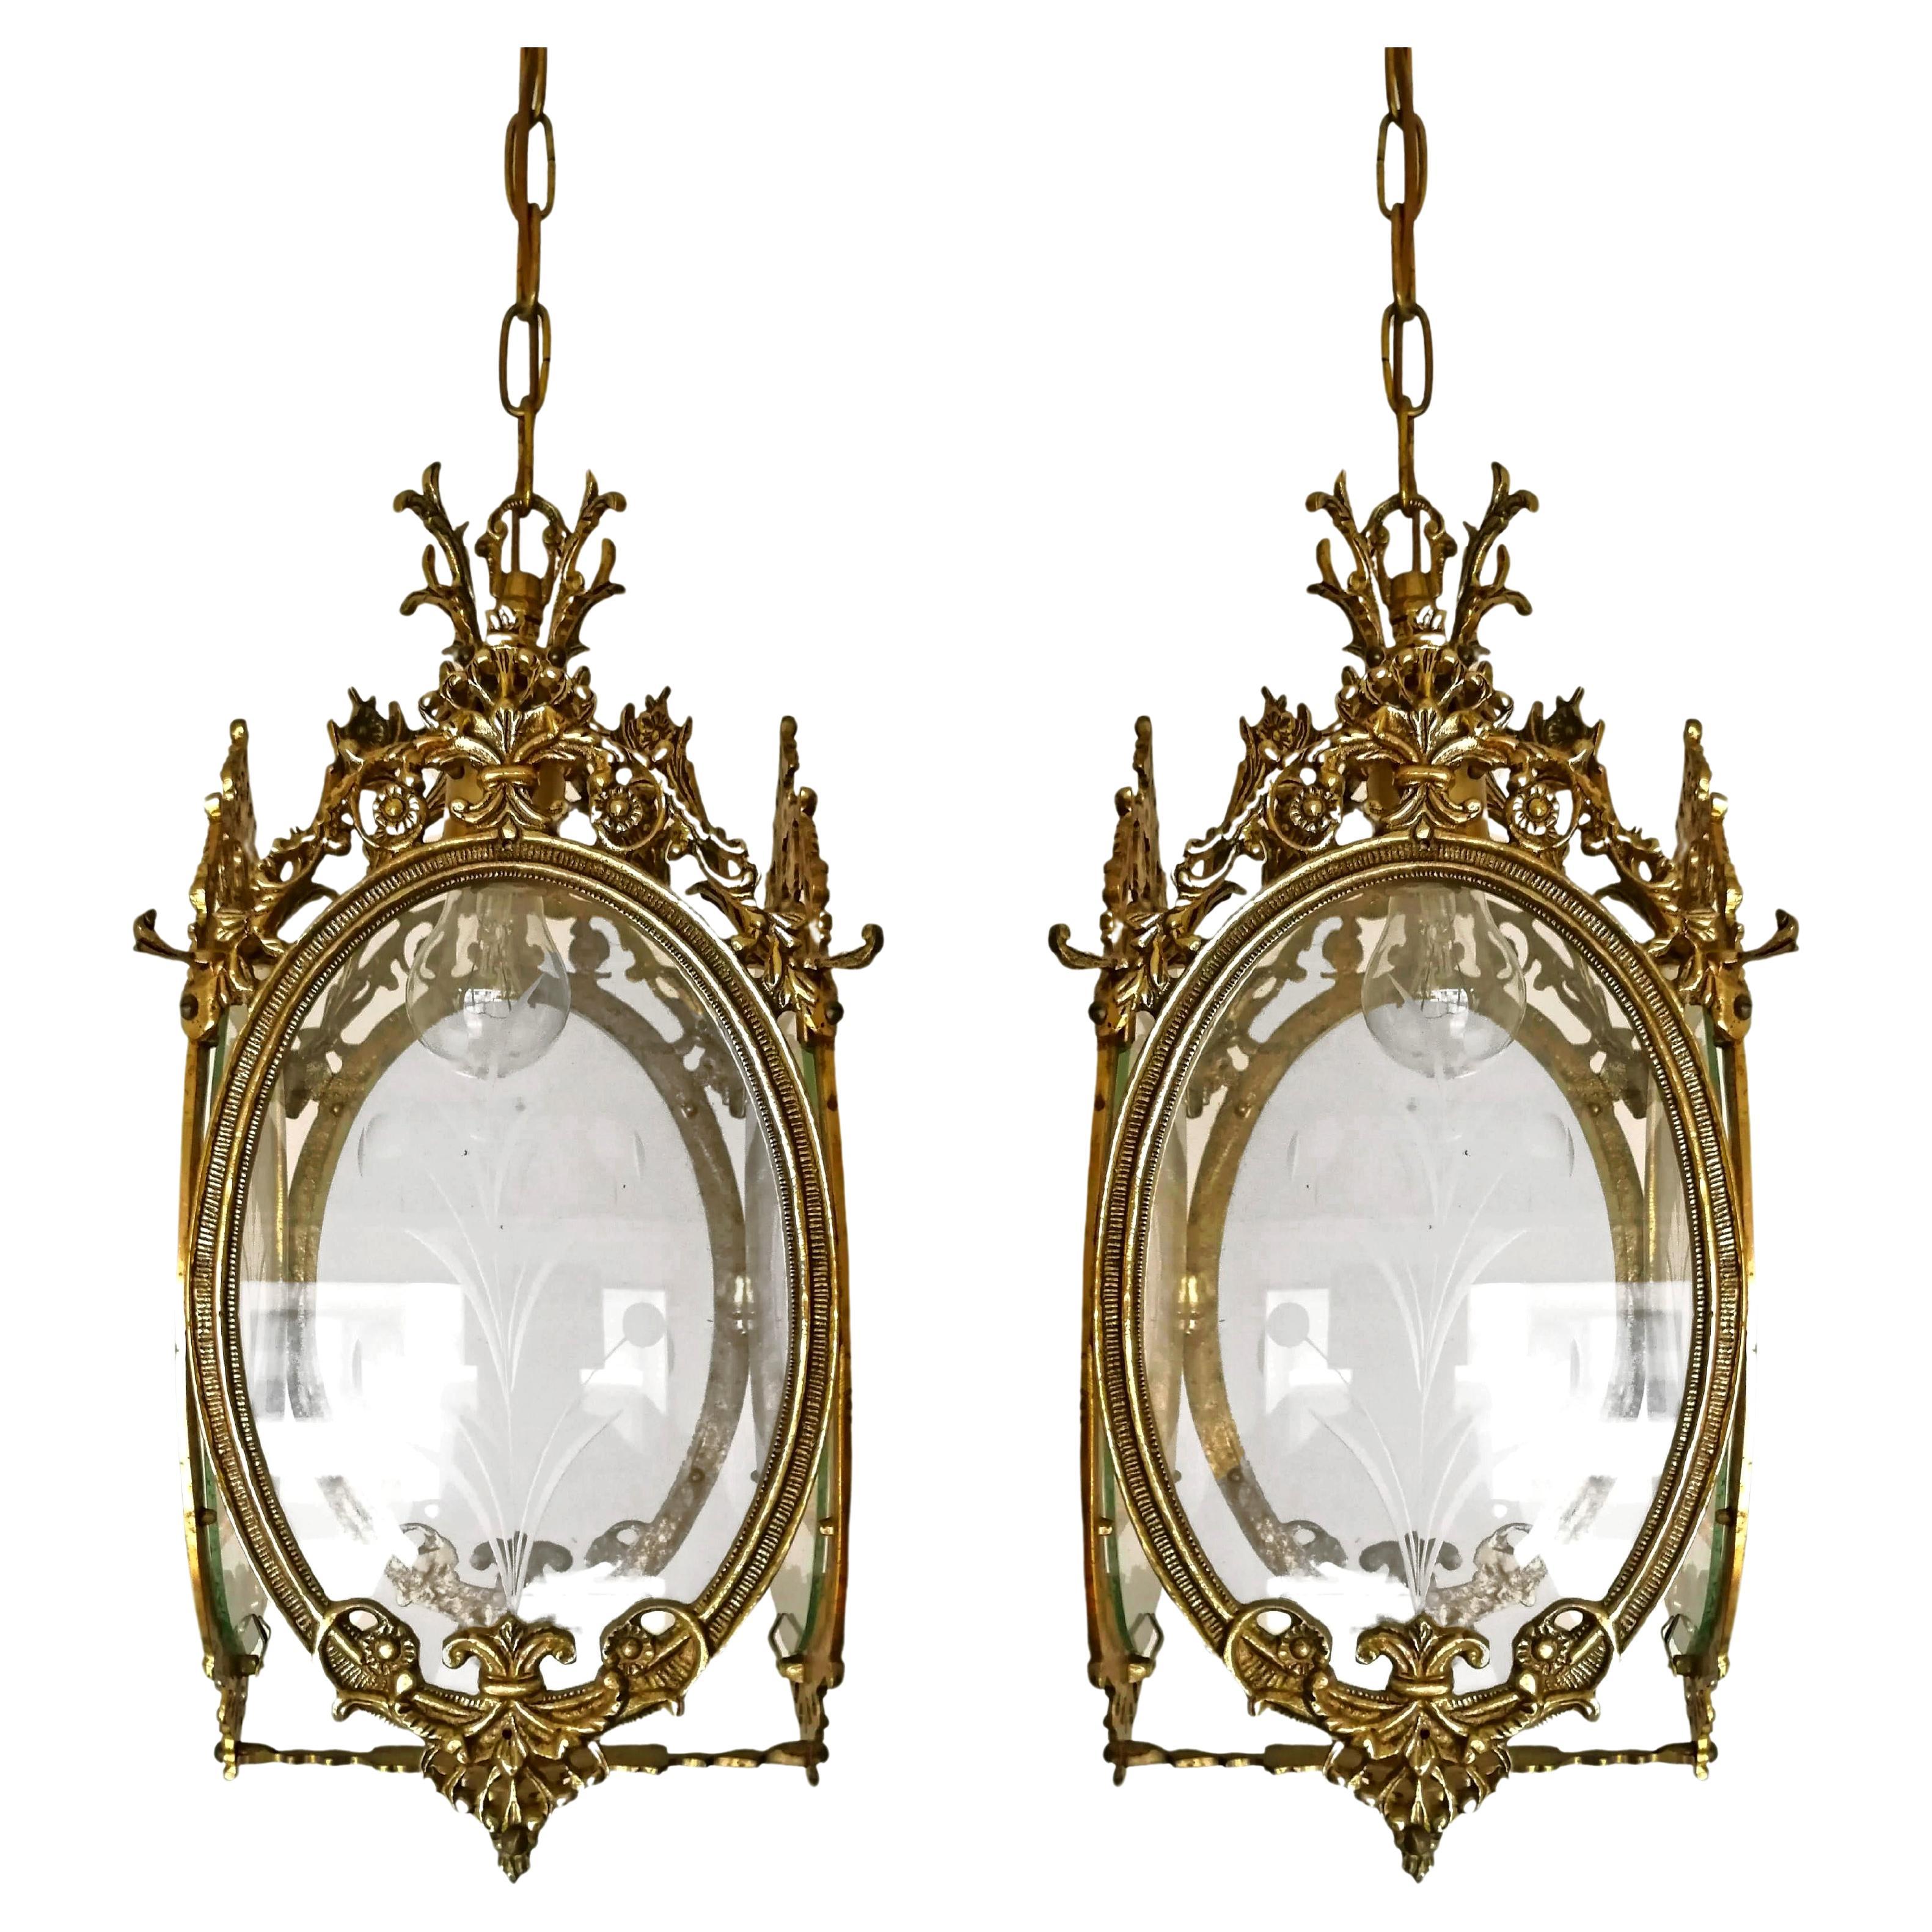 Pair of Antique Louis XVI French Lanterns Chandeliers in Gilt Bronze & Cut Glass